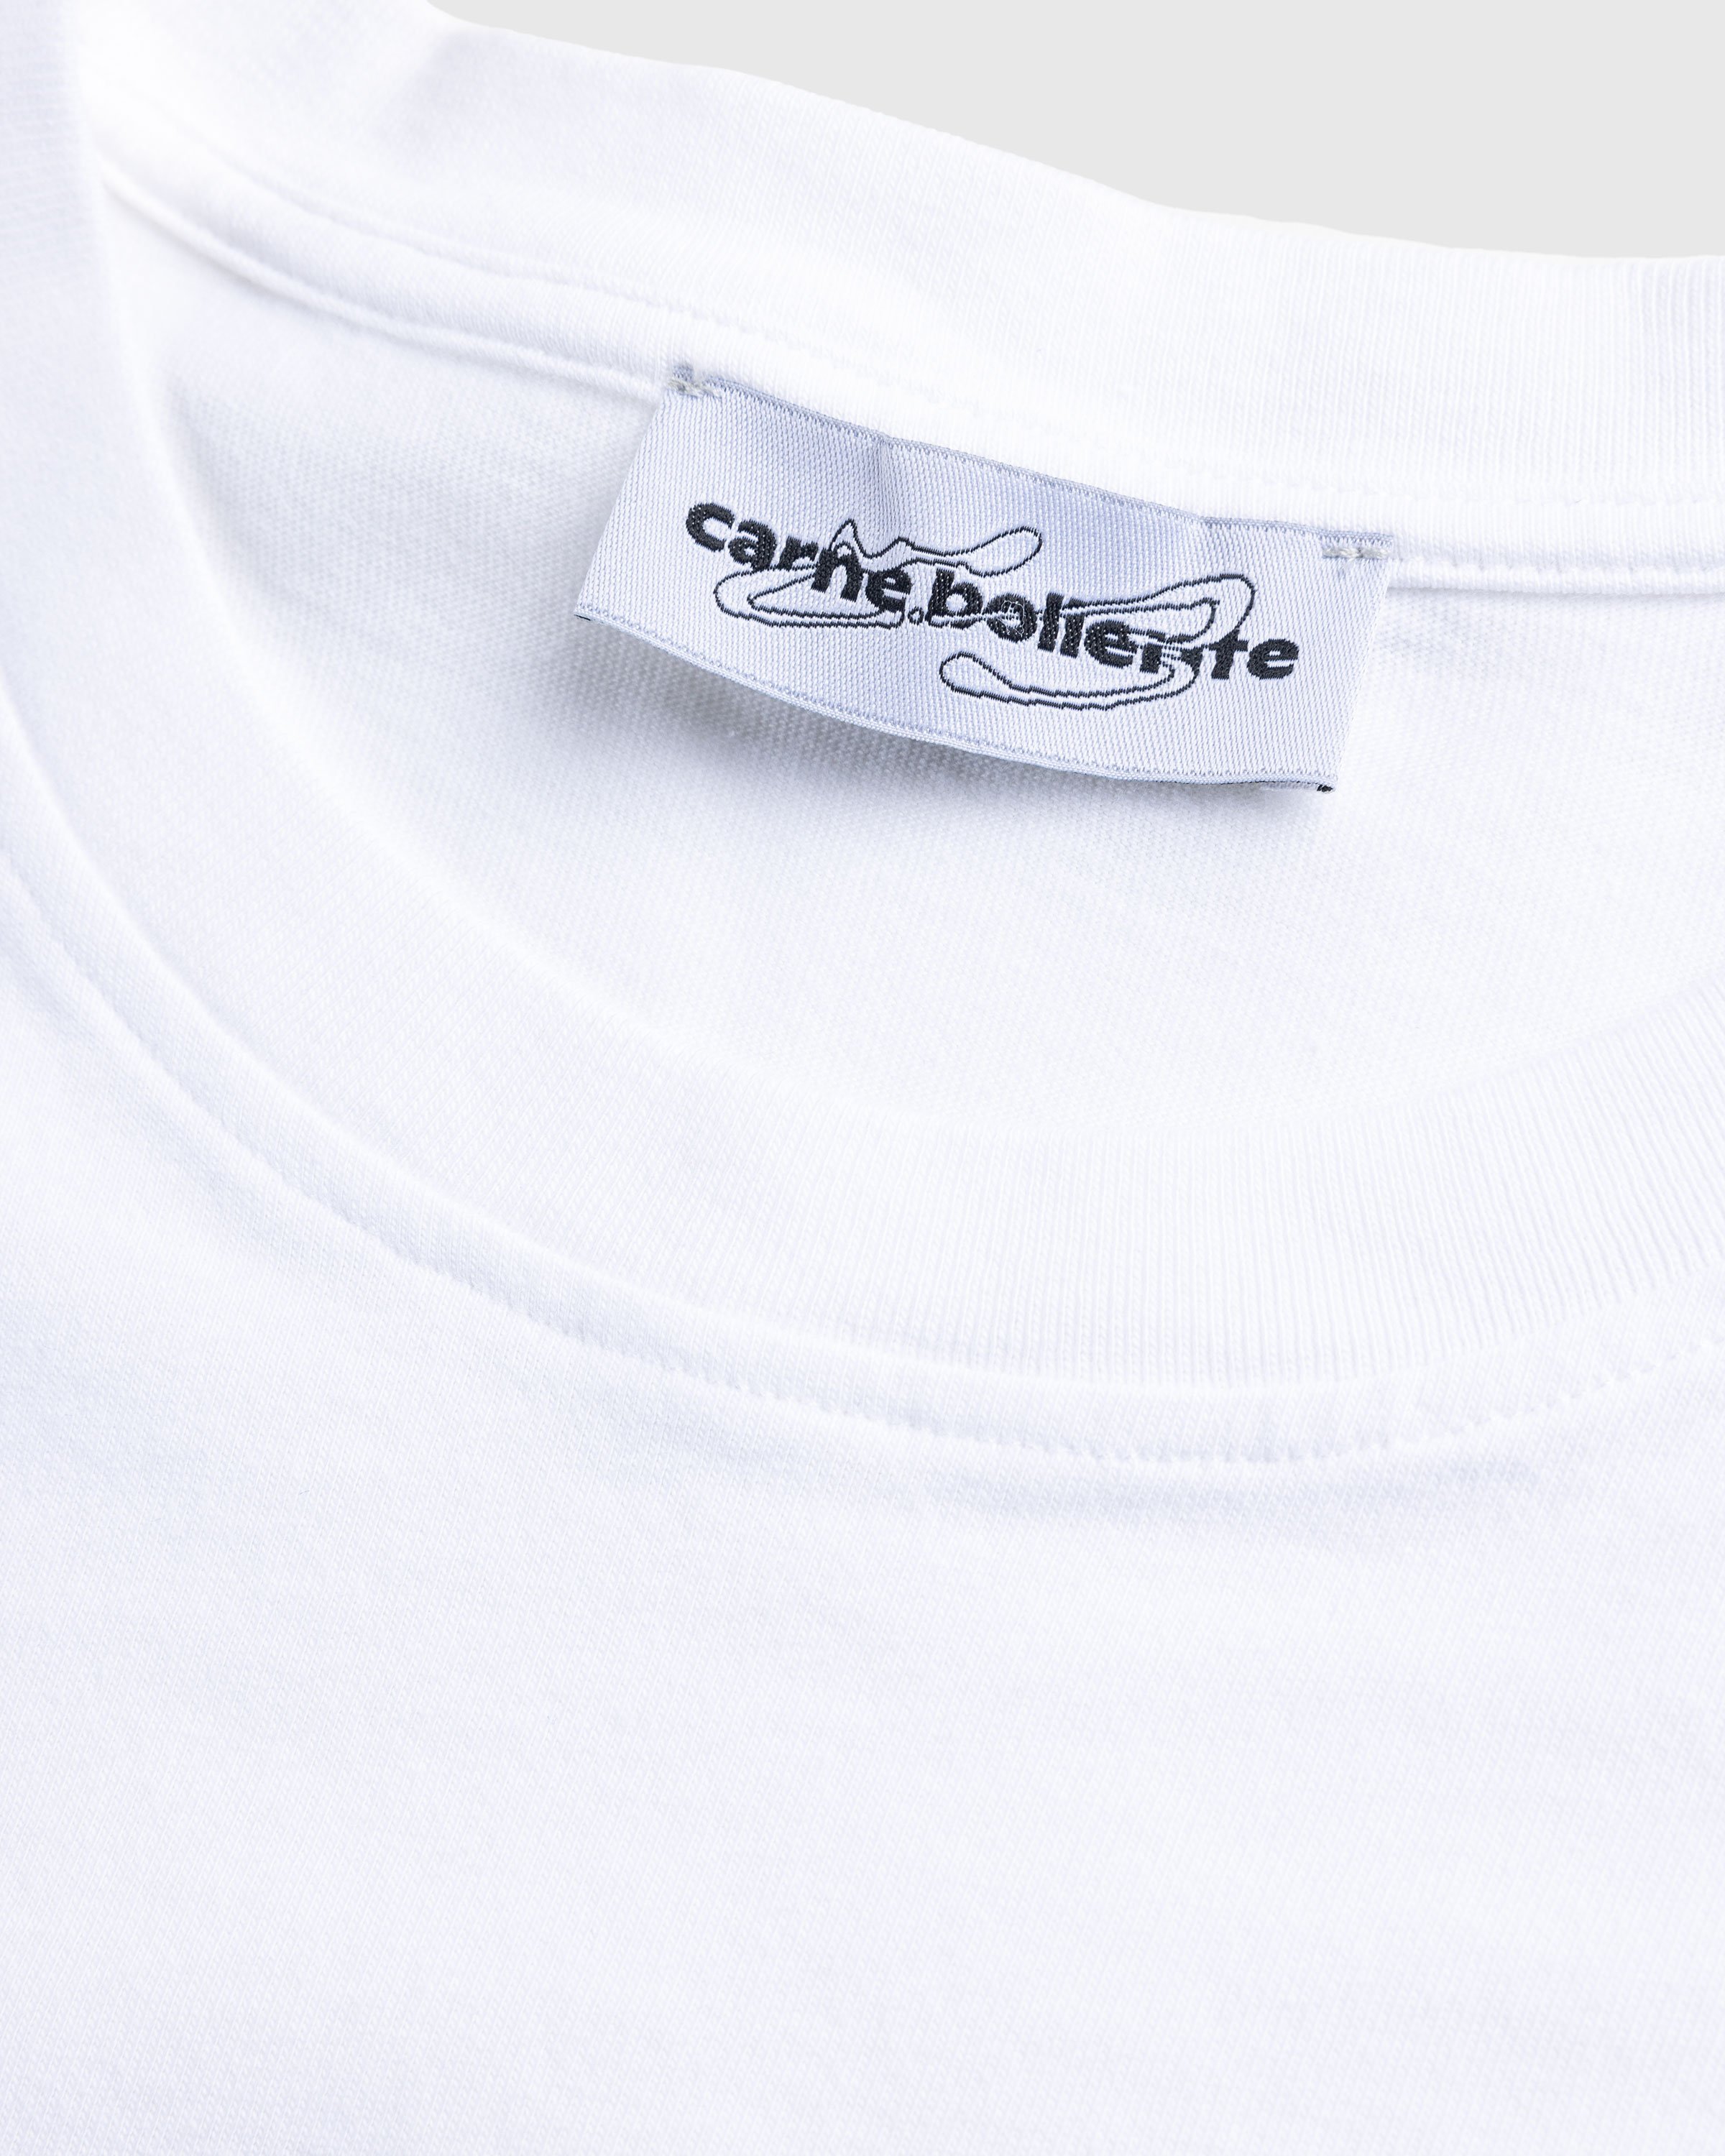 Carne Bollente - Since Forever White - Clothing - White - Image 7